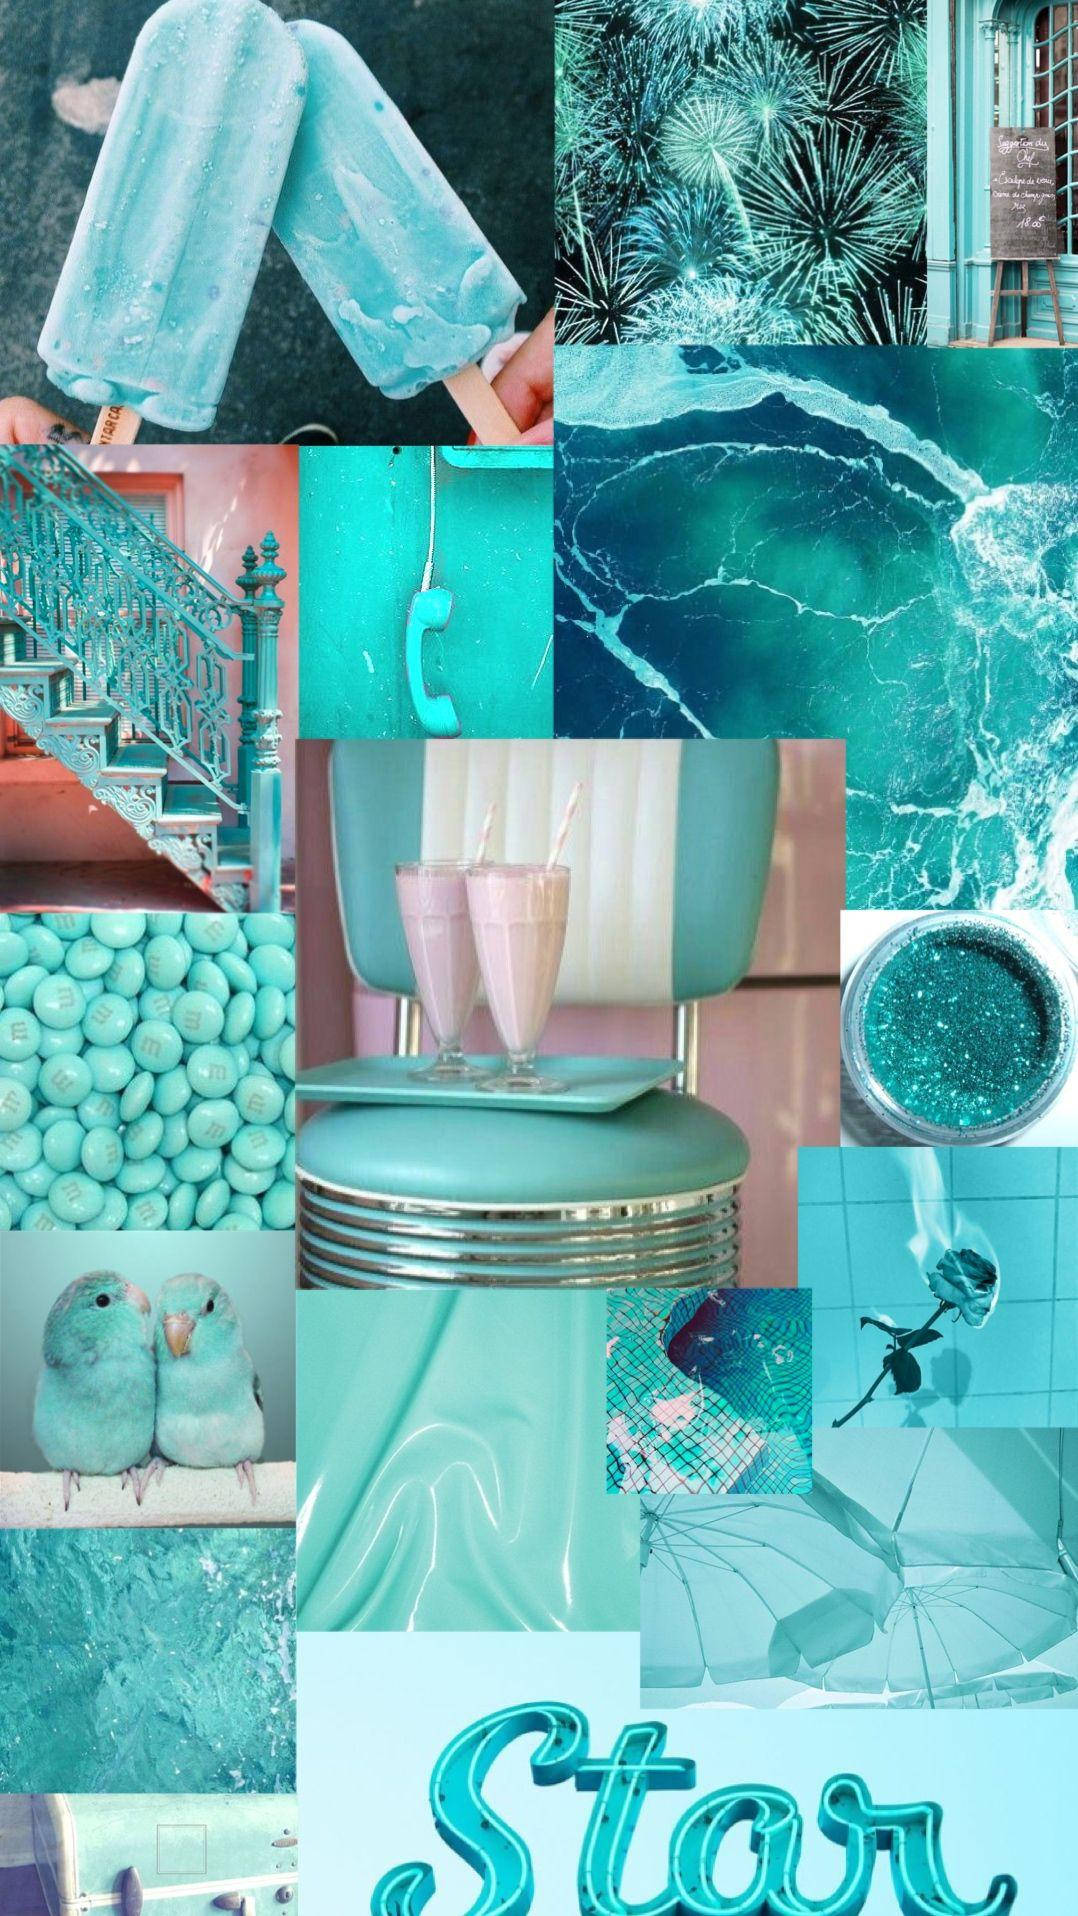 Overlapping Photomontage Aesthetic Teal